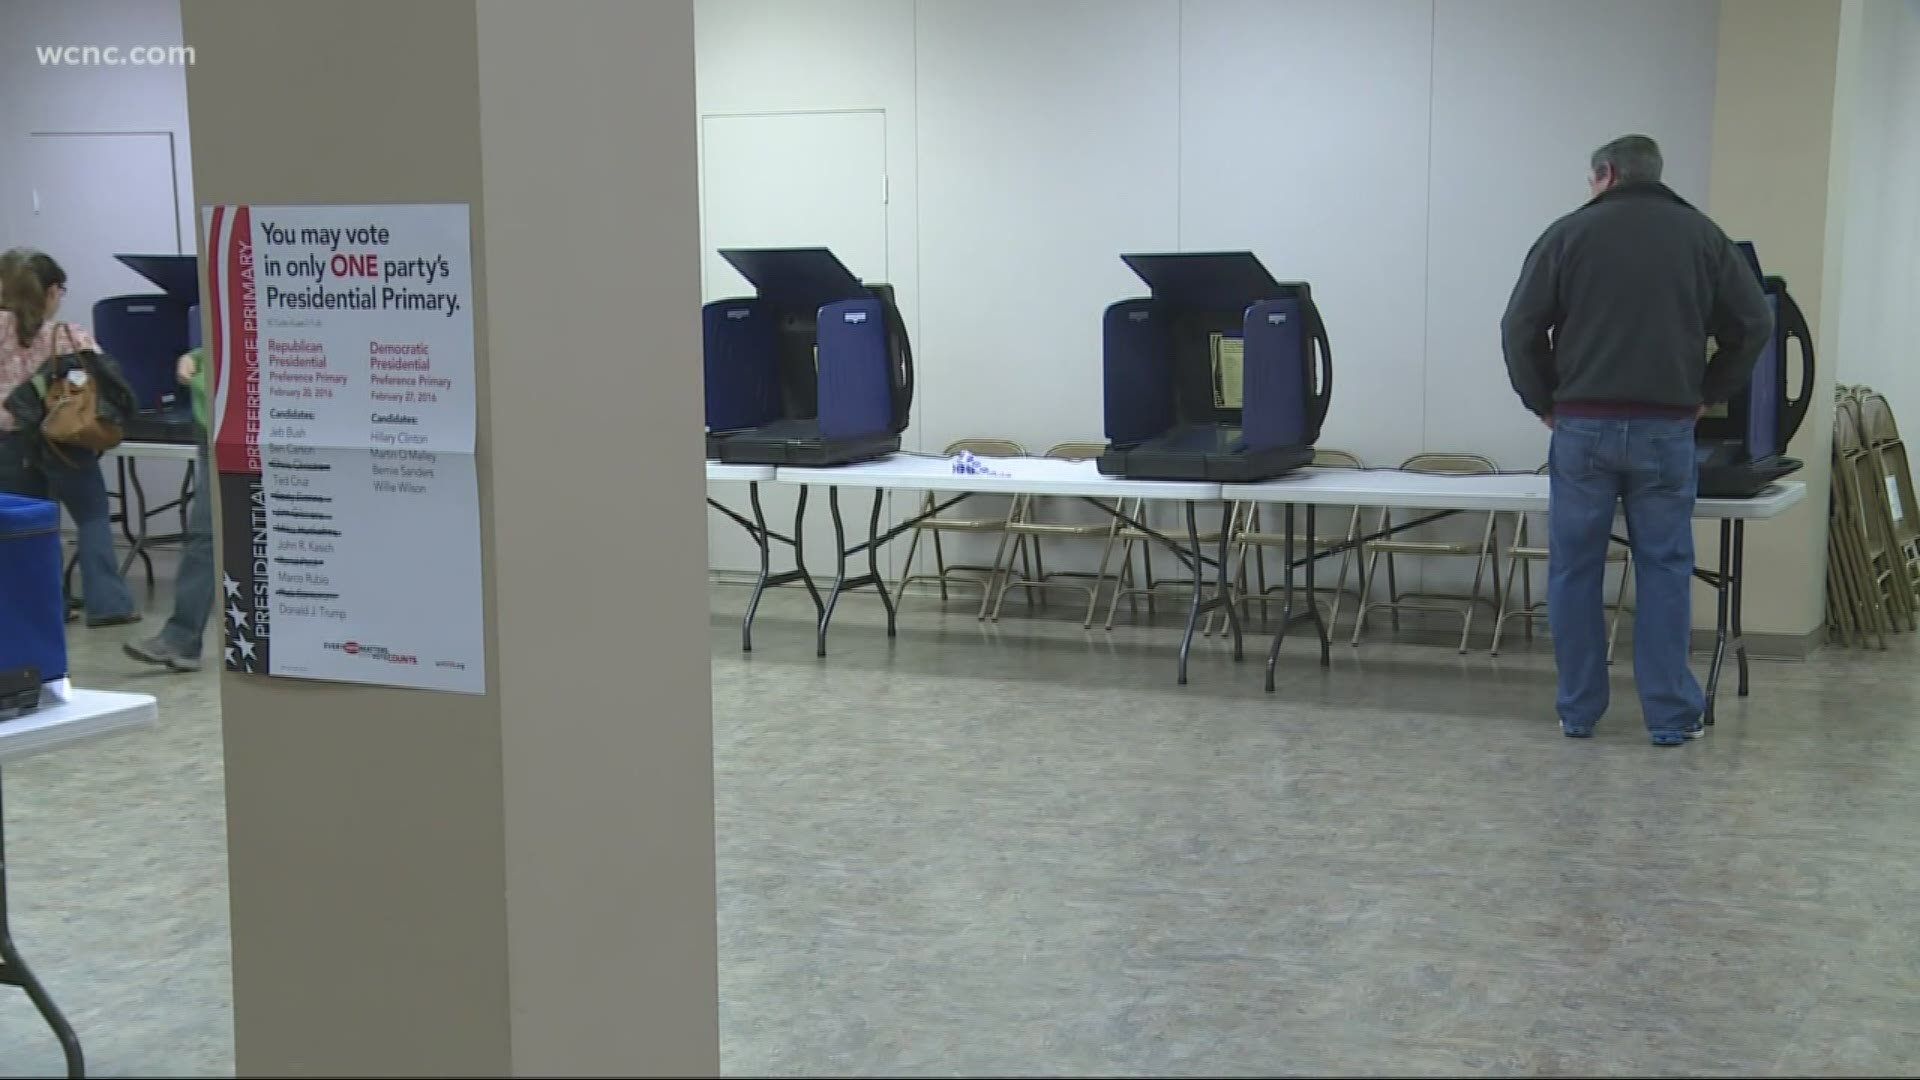 Many voters are wondering if their votes will be secure after the caucus chaos in Iowa.